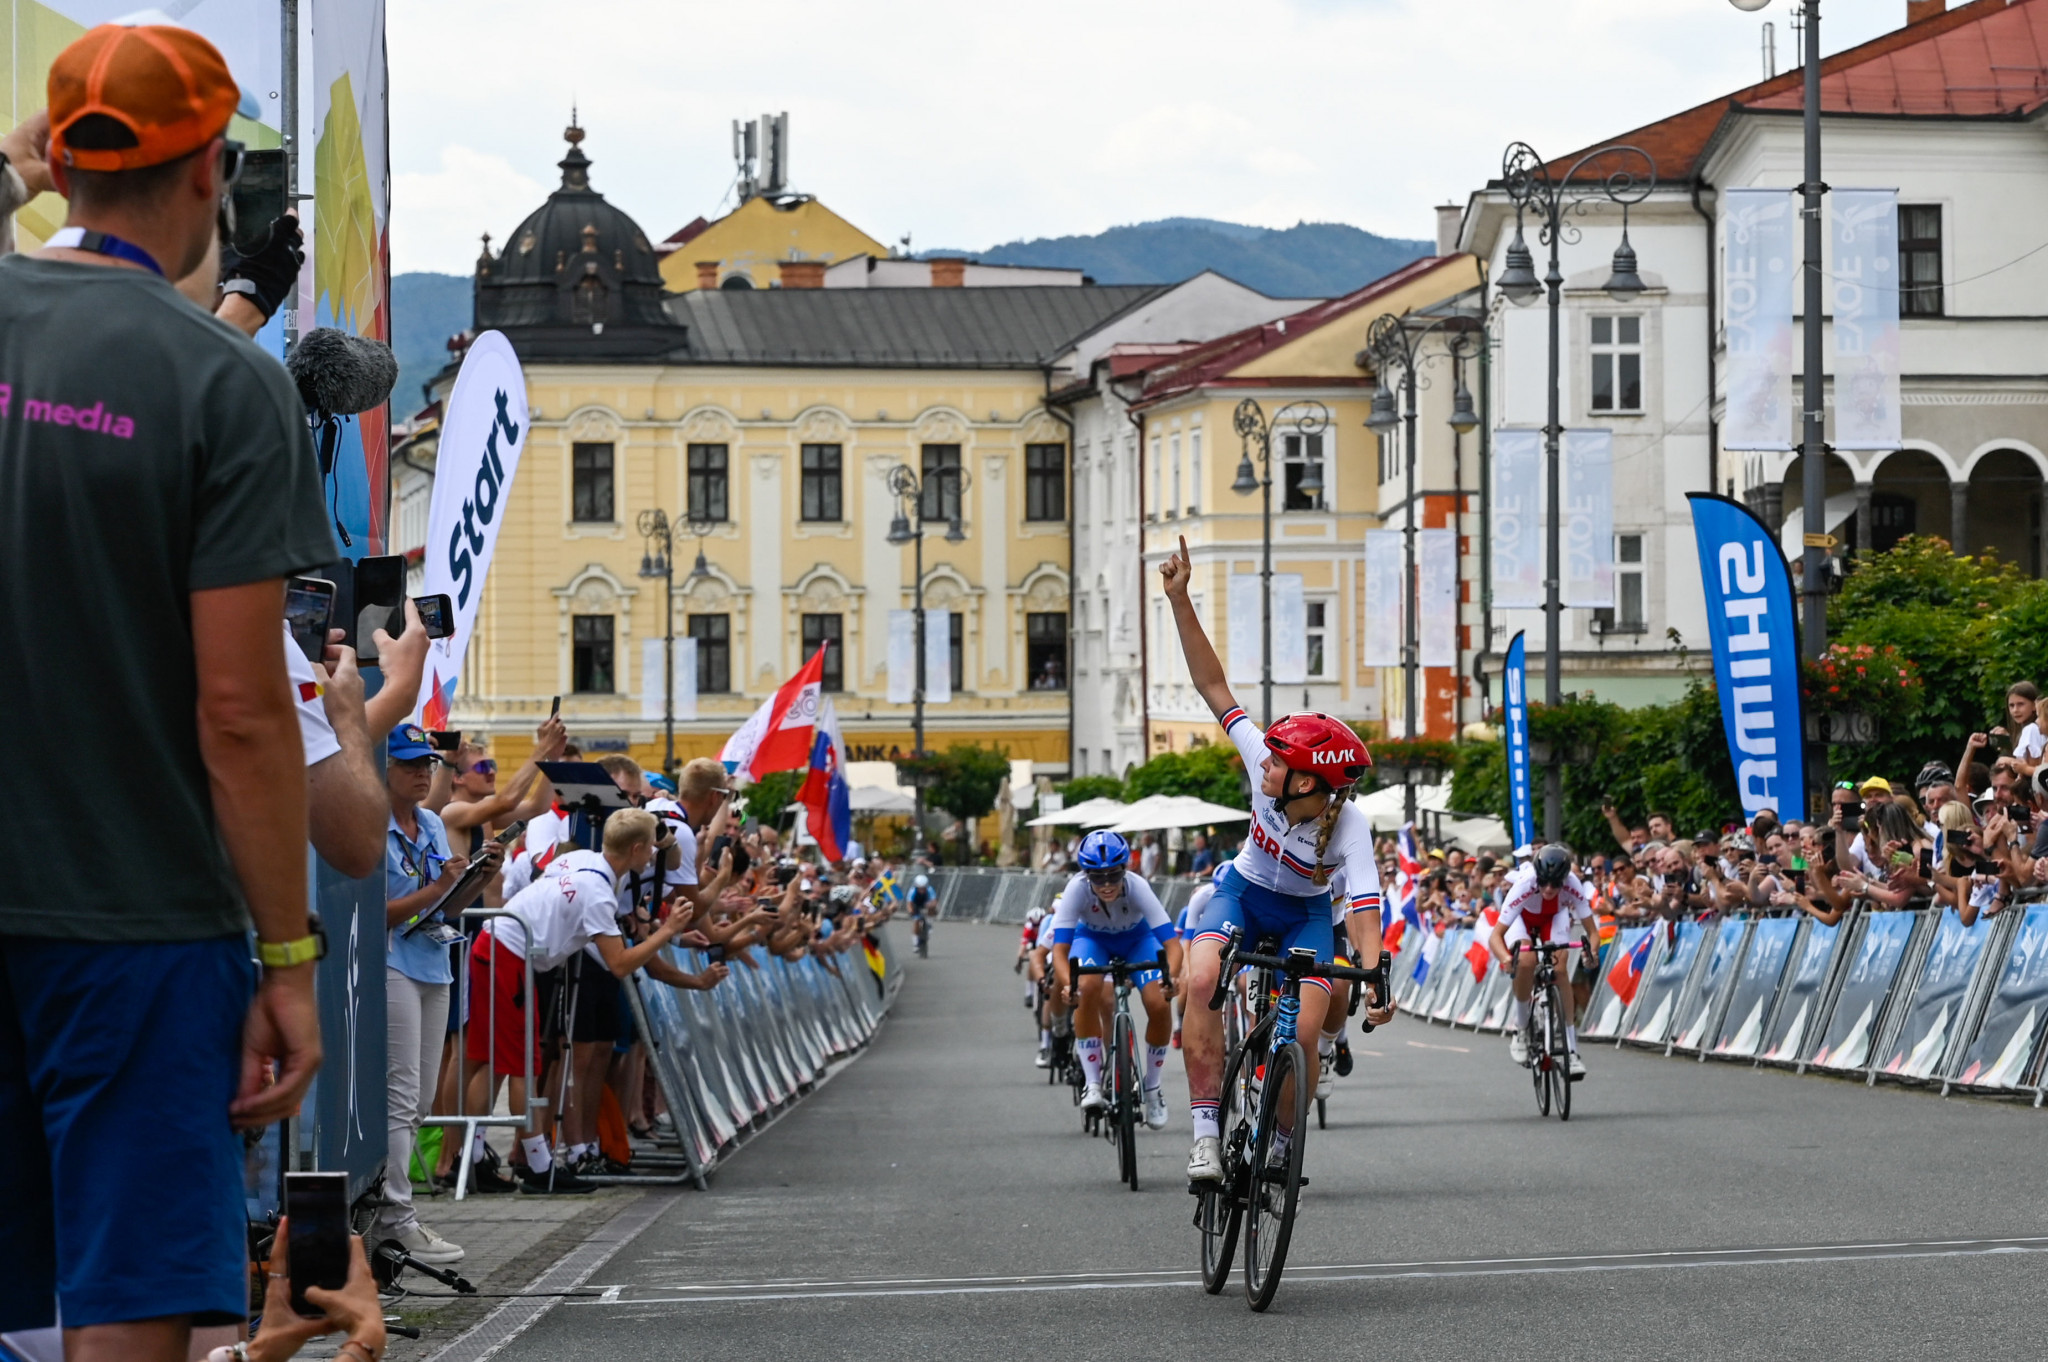 Britain's Cat Ferguson won a dramatic girls' road race to add to her time trial gold medal from two days prior ©EYOF Banská Bystrica 2022